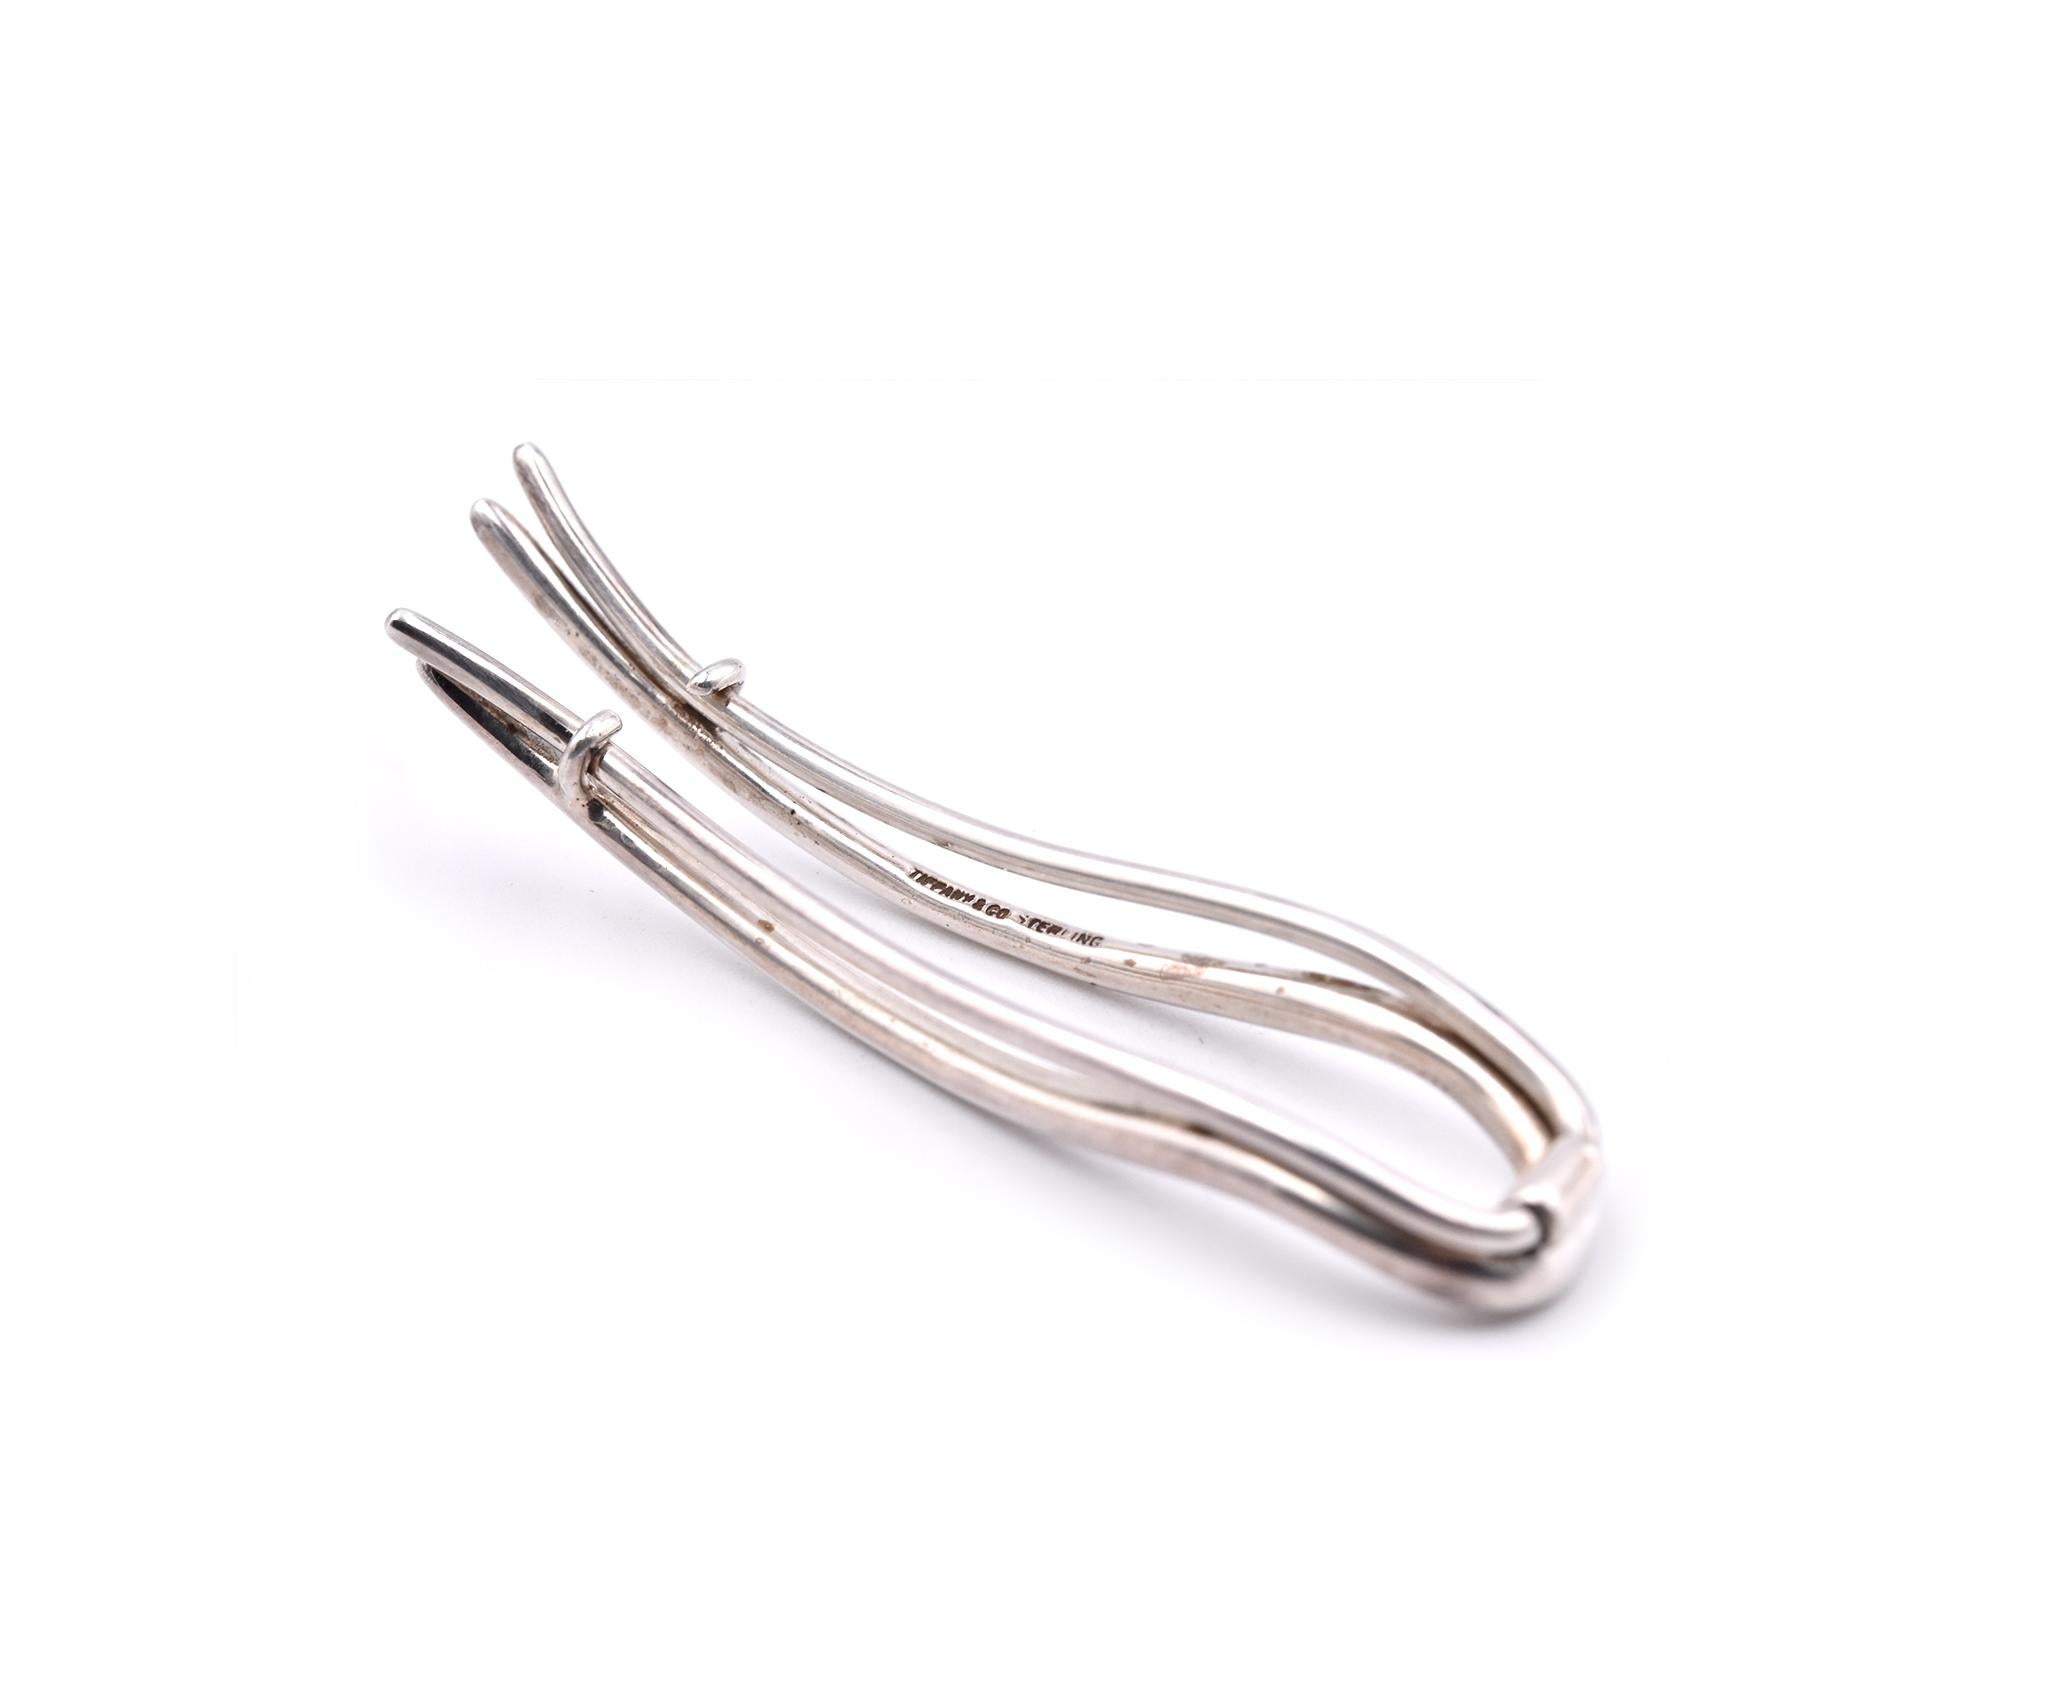 Designer: Tiffany & Co
Material: sterling silver
Weight: 7.93 grams
